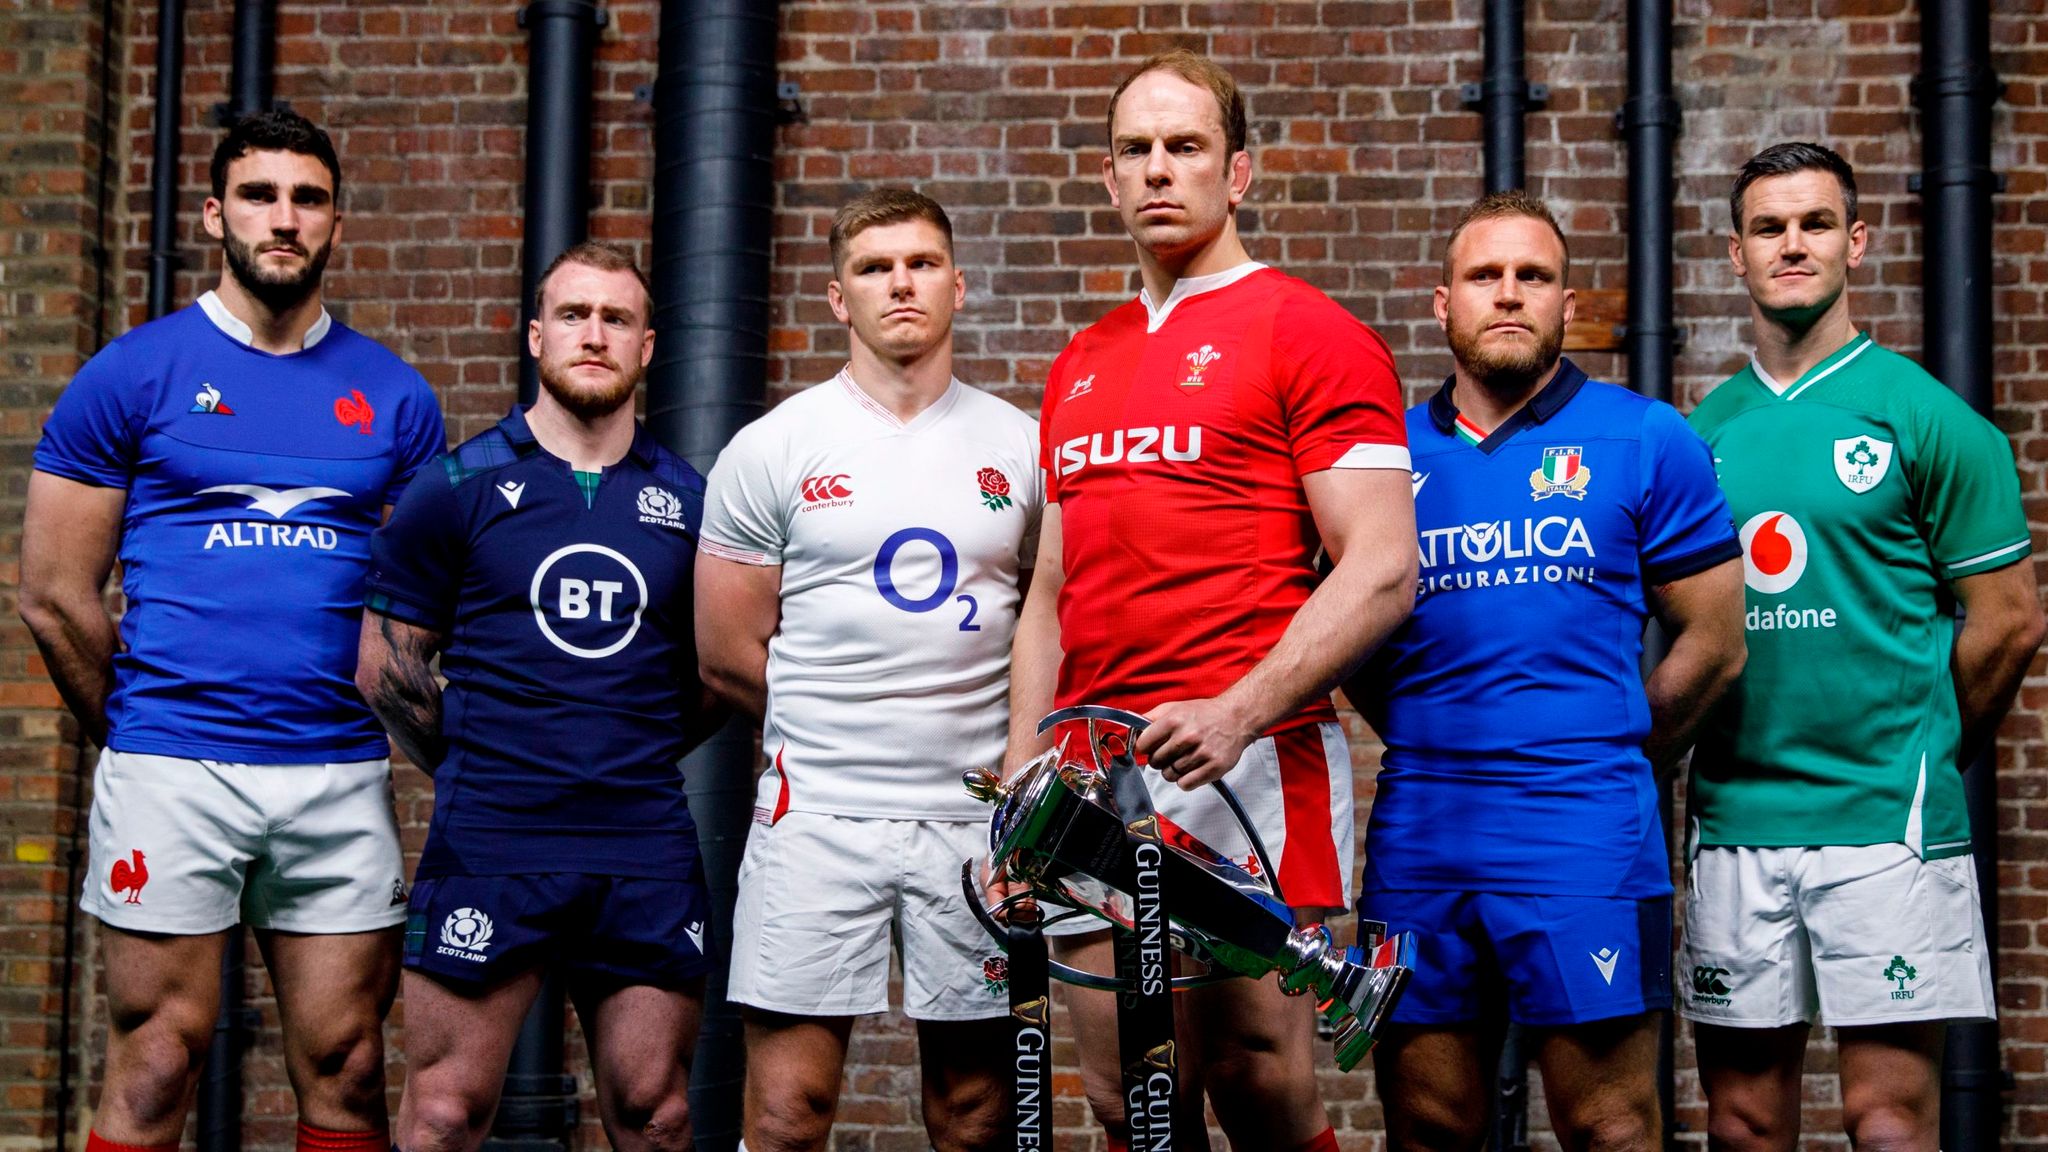 How Thing Stands Heading Into The Rescheduled Six Nations 2020 Fixtures